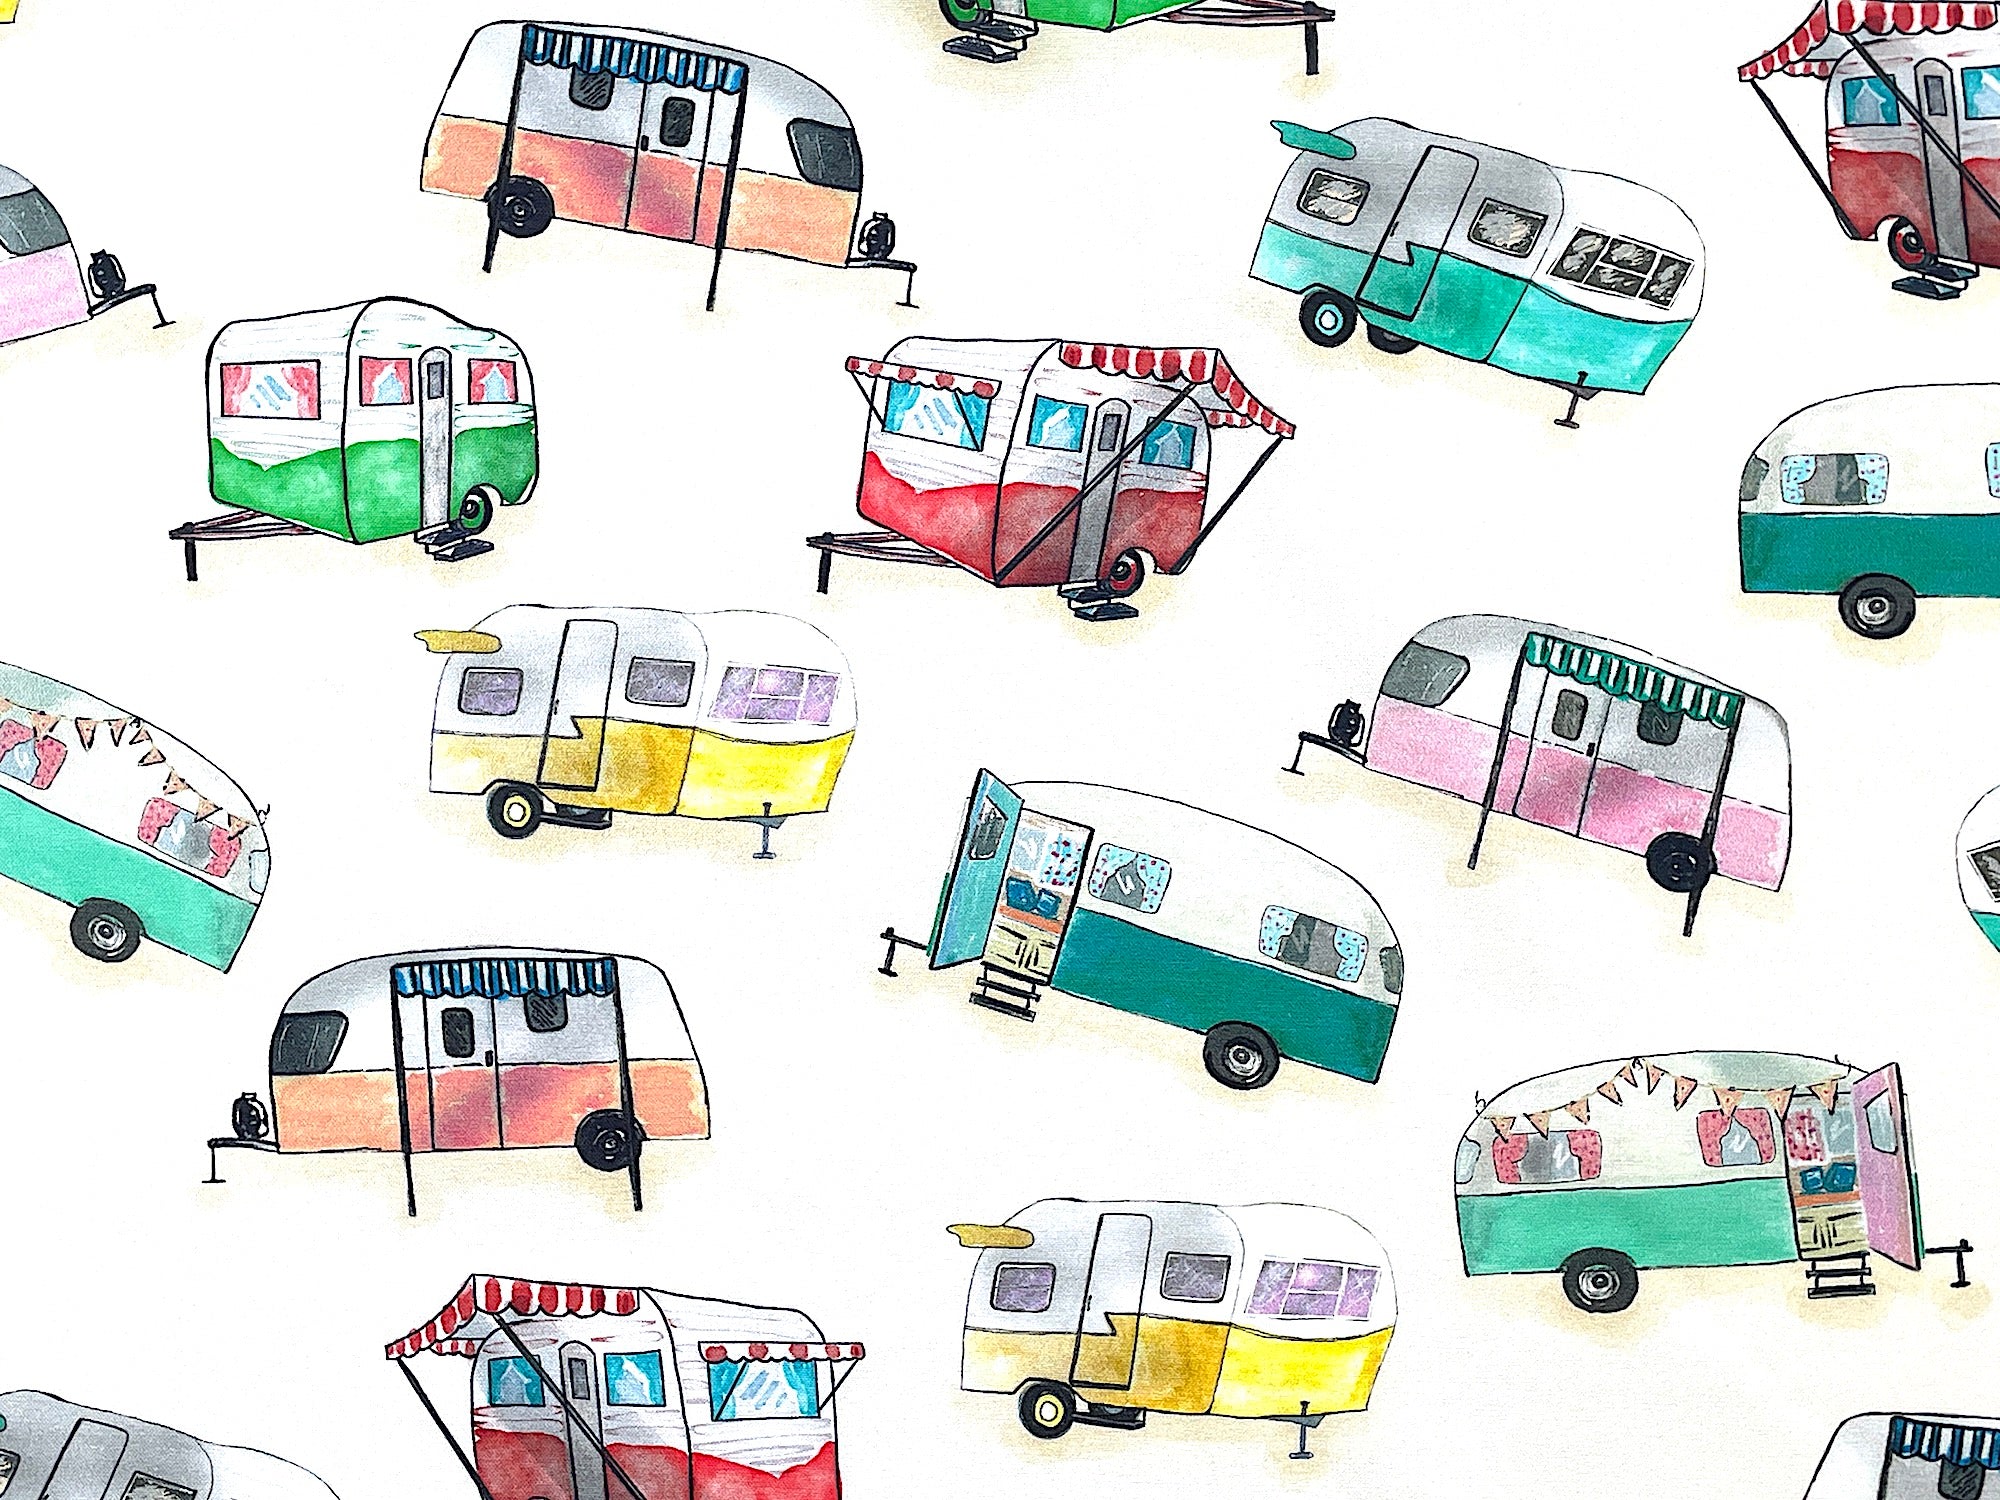 Red, blue, green, yellow and pink travel trailers are tossed all over this cotton fabric.